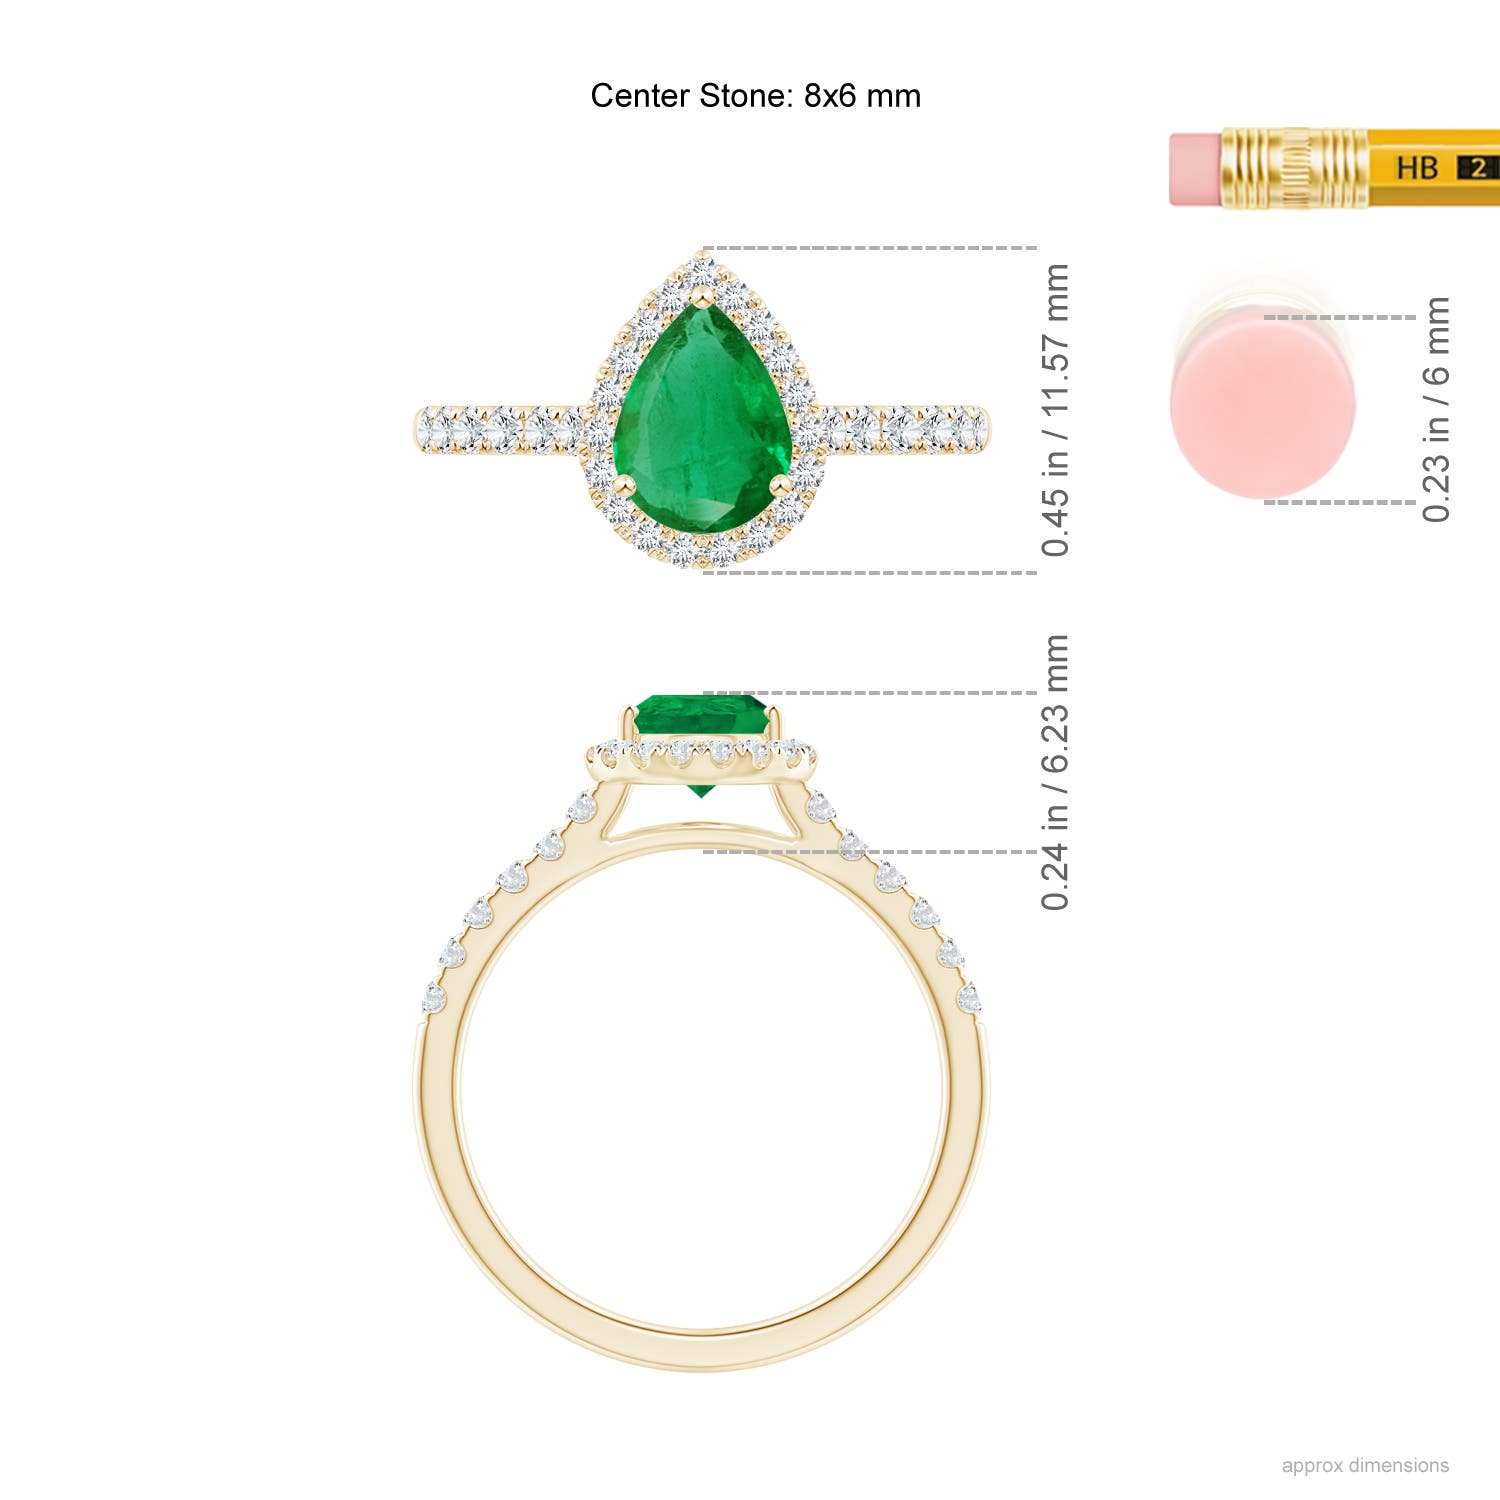 AA - Emerald / 1.32 CT / 14 KT Yellow Gold